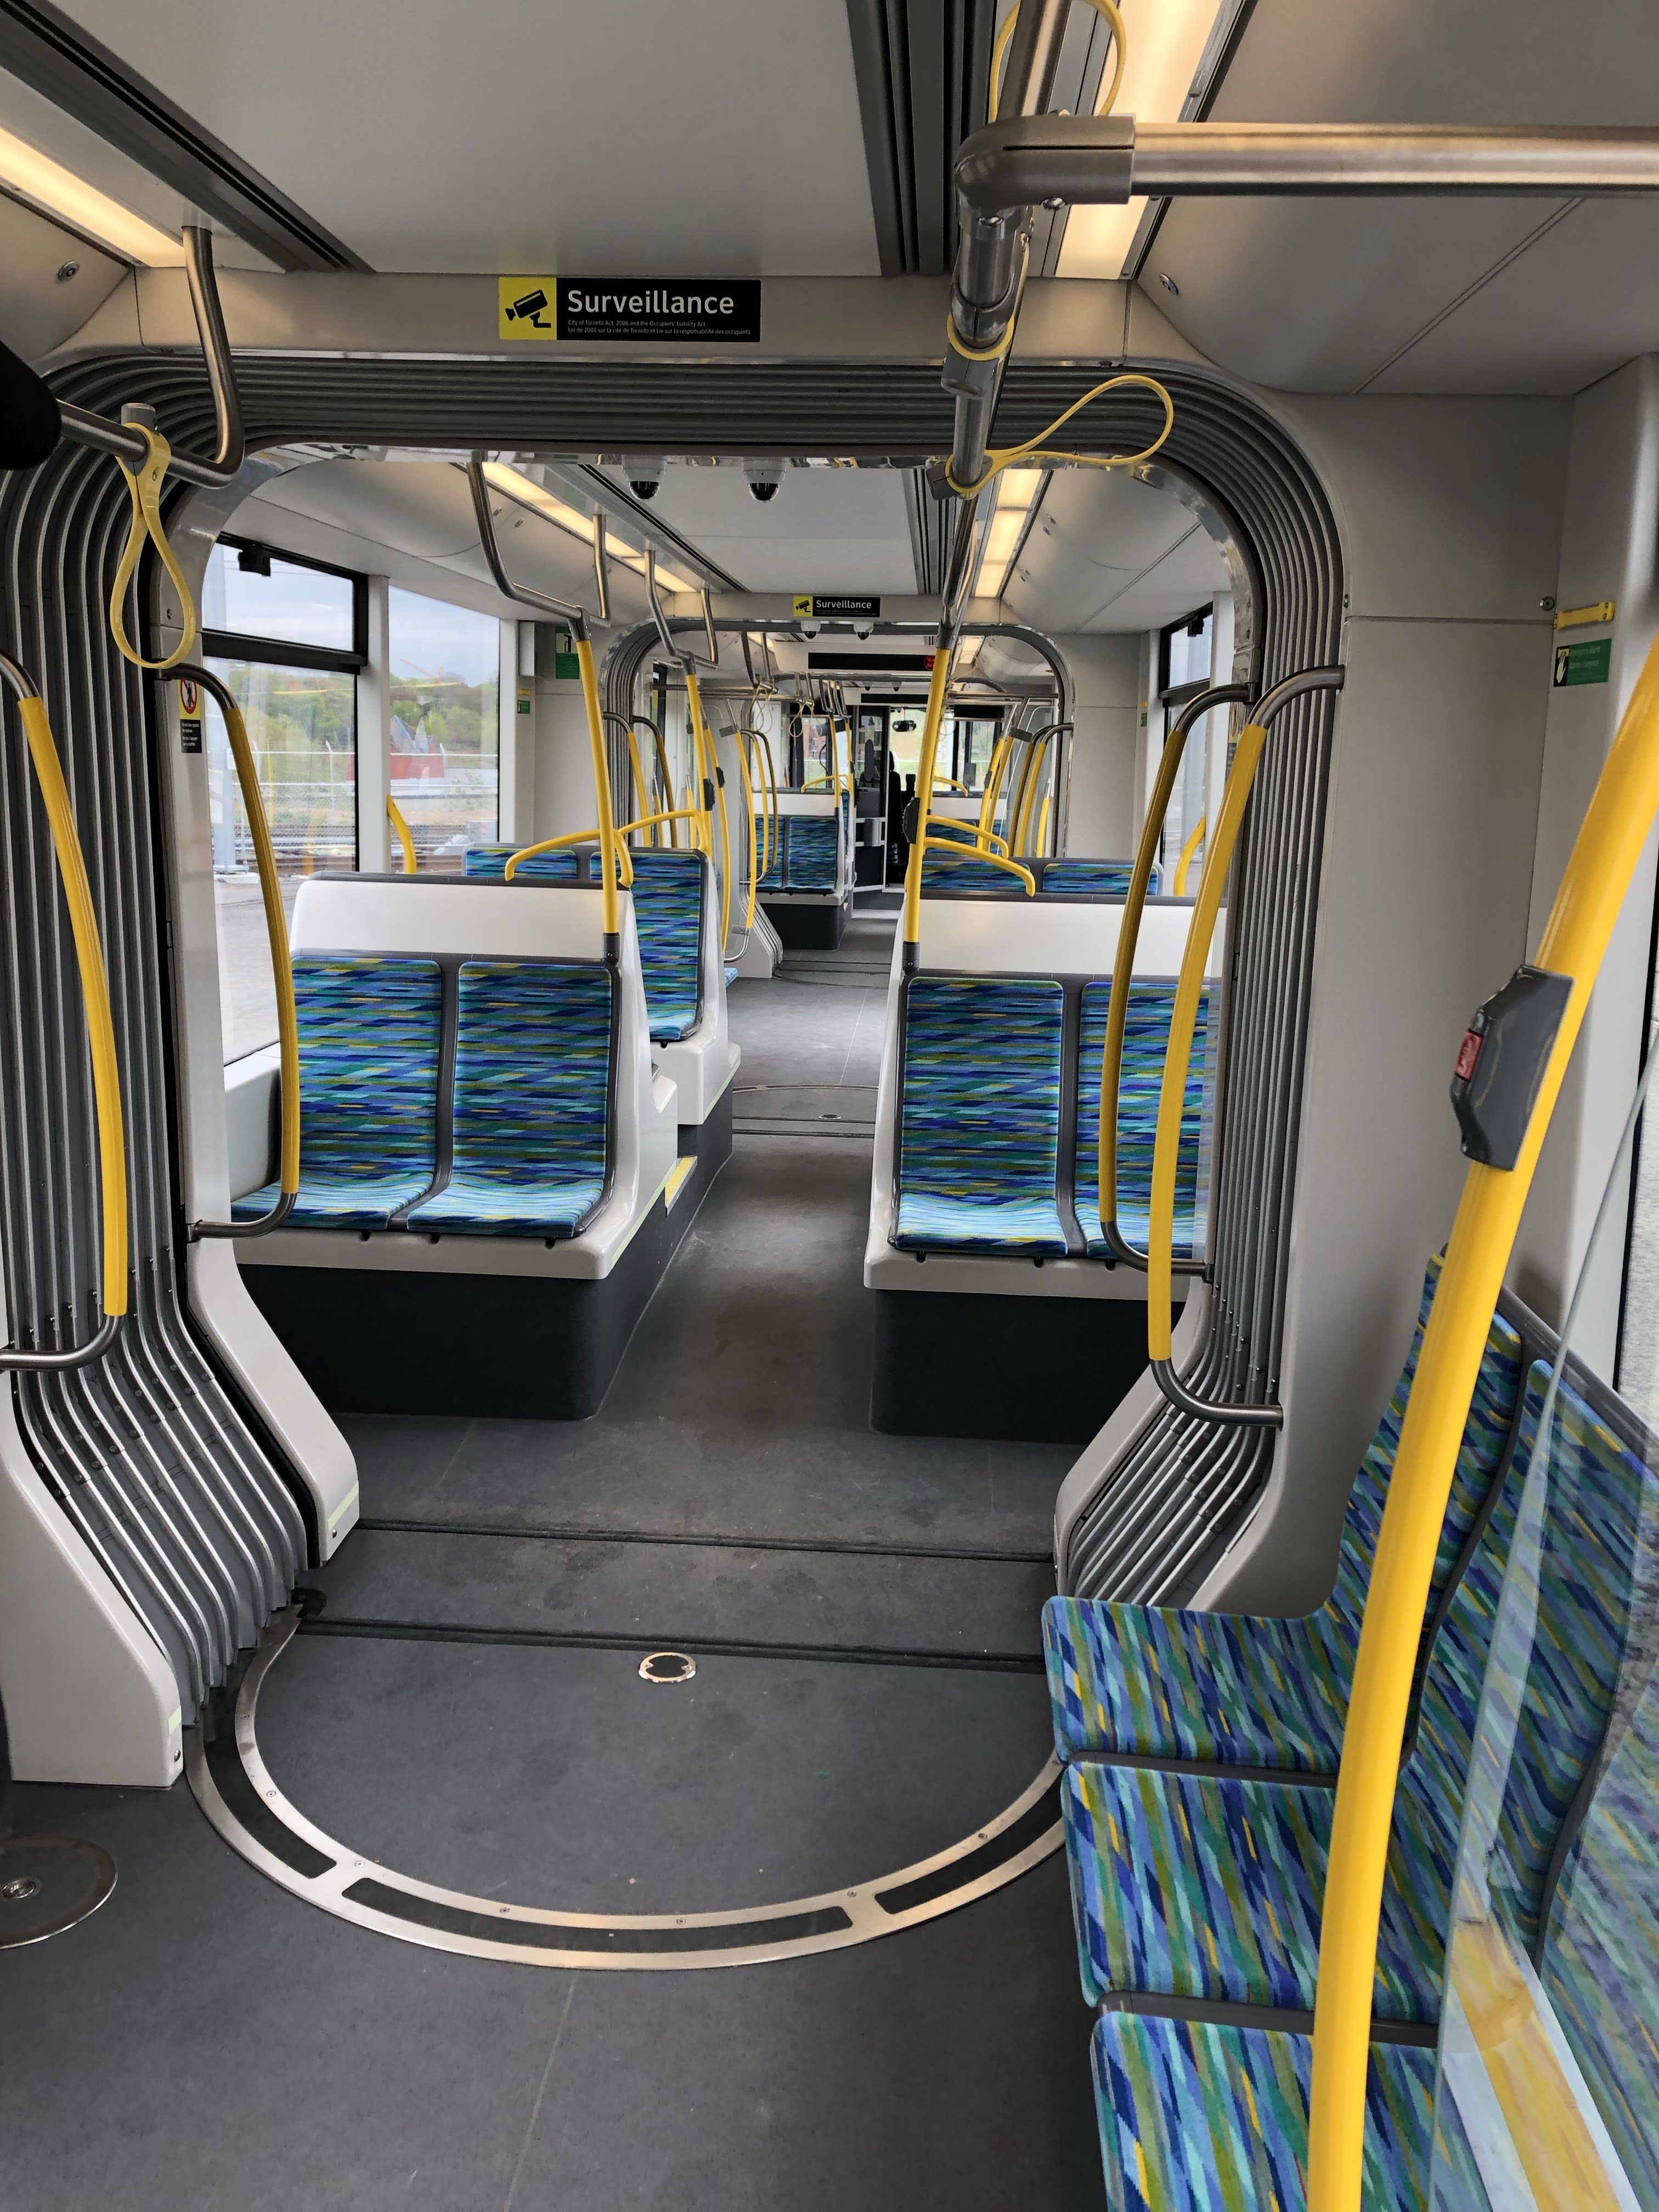 The inside of the LRV with blue and green seats and plenty of standing room.